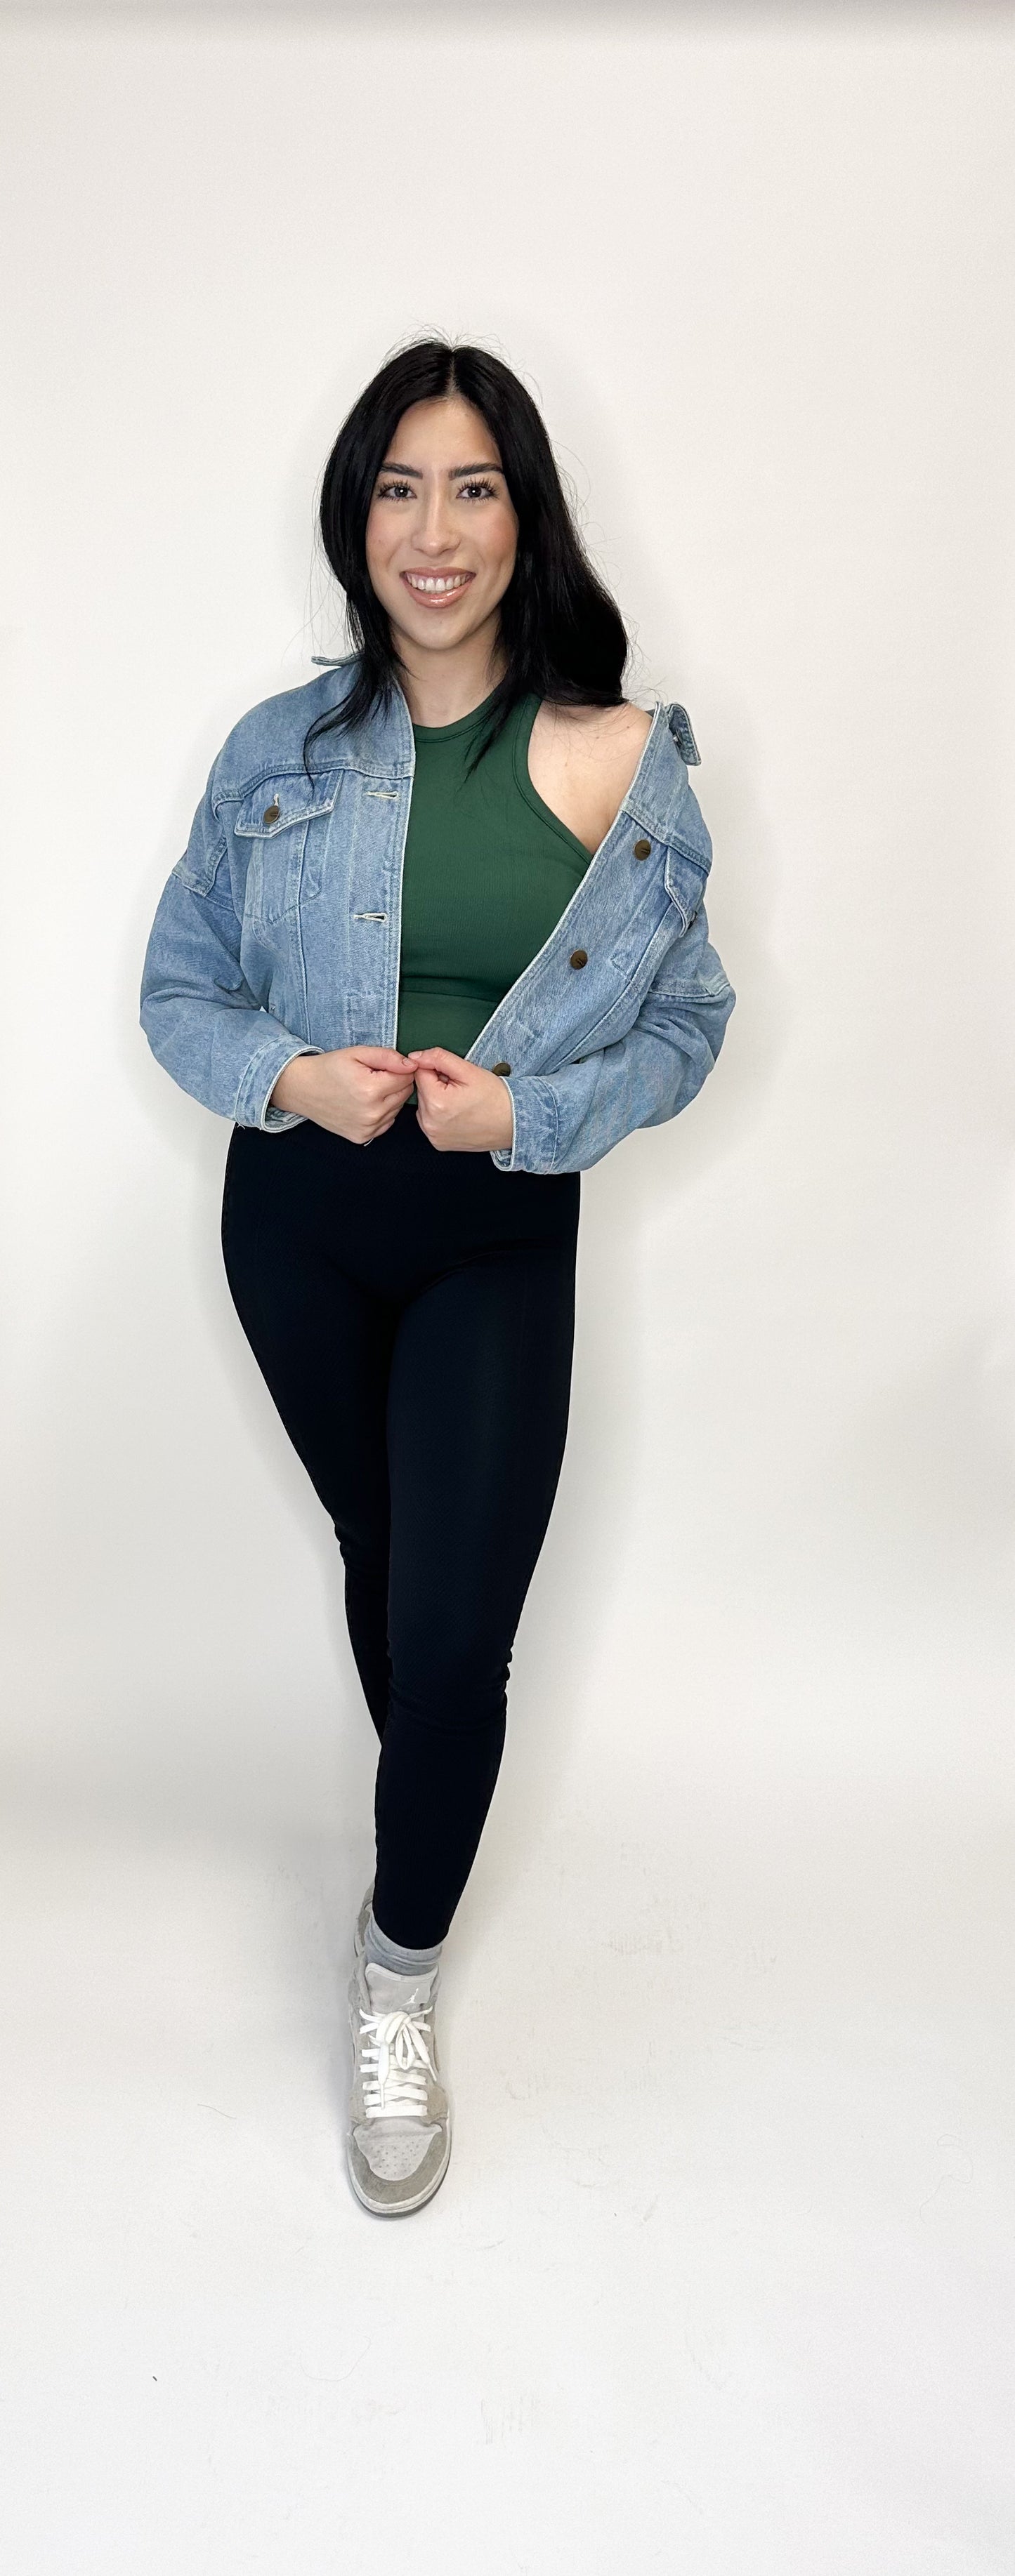 Small Town Cropped Denim Jacket